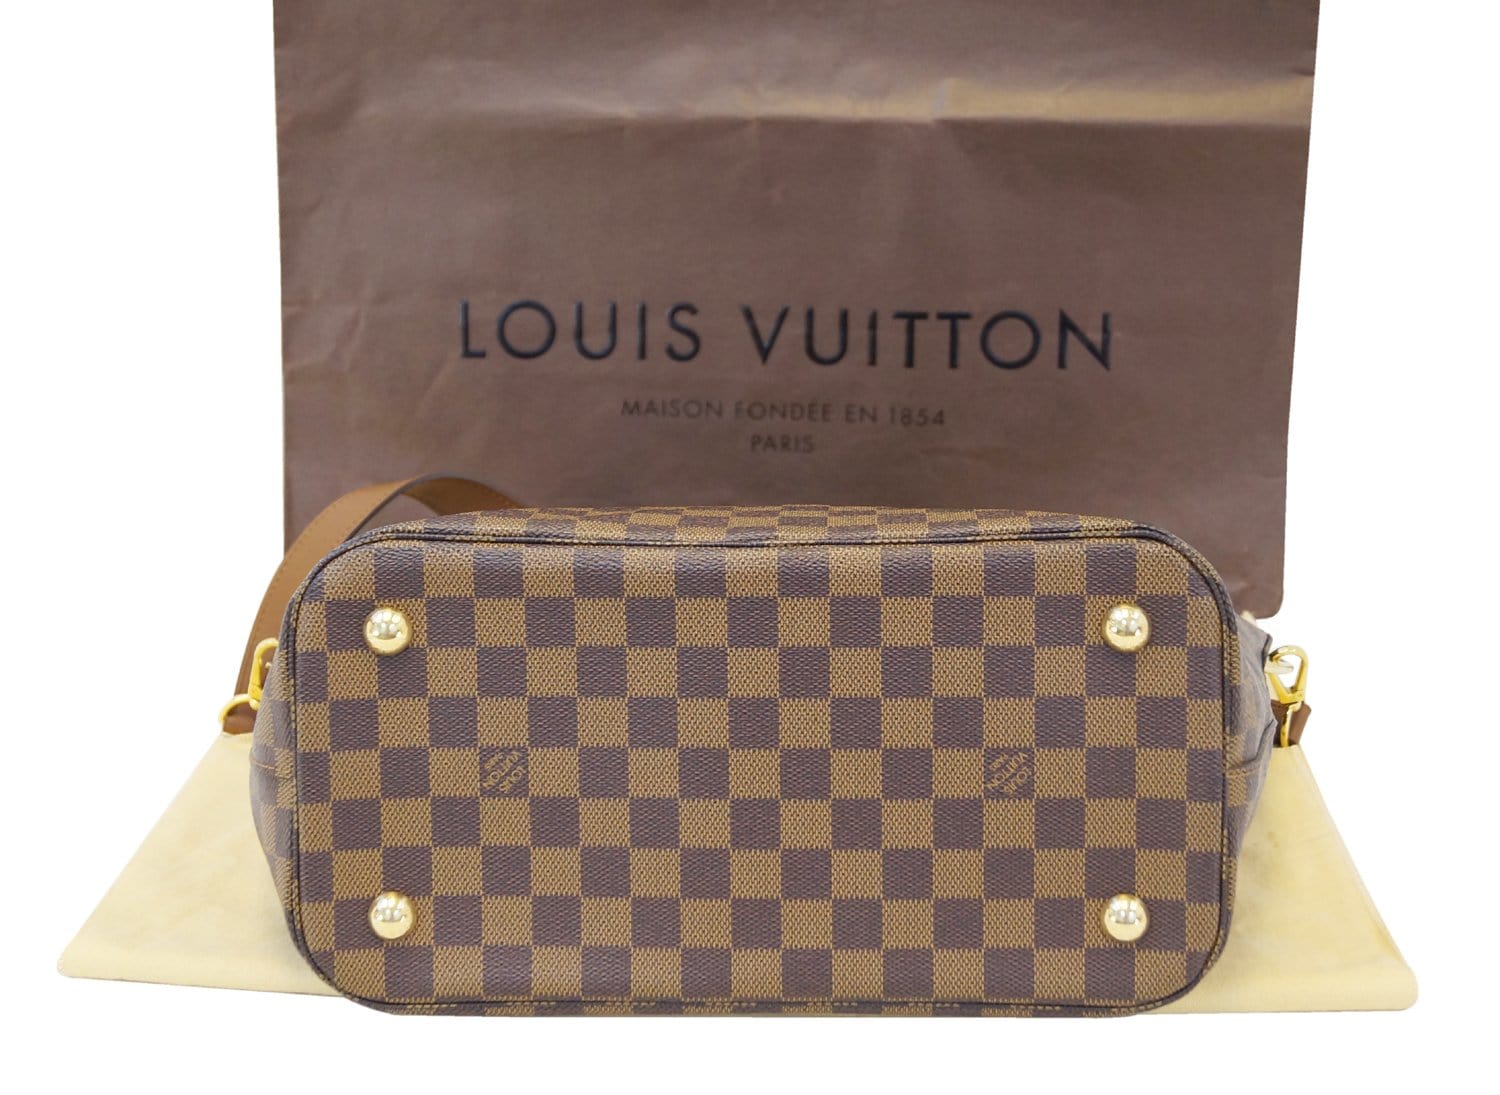 Hot stamped initials on my LV damier Bandouliere. Love!  Louis vuitton  handbags outlet, Cheap louis vuitton handbags, Louis vuitton